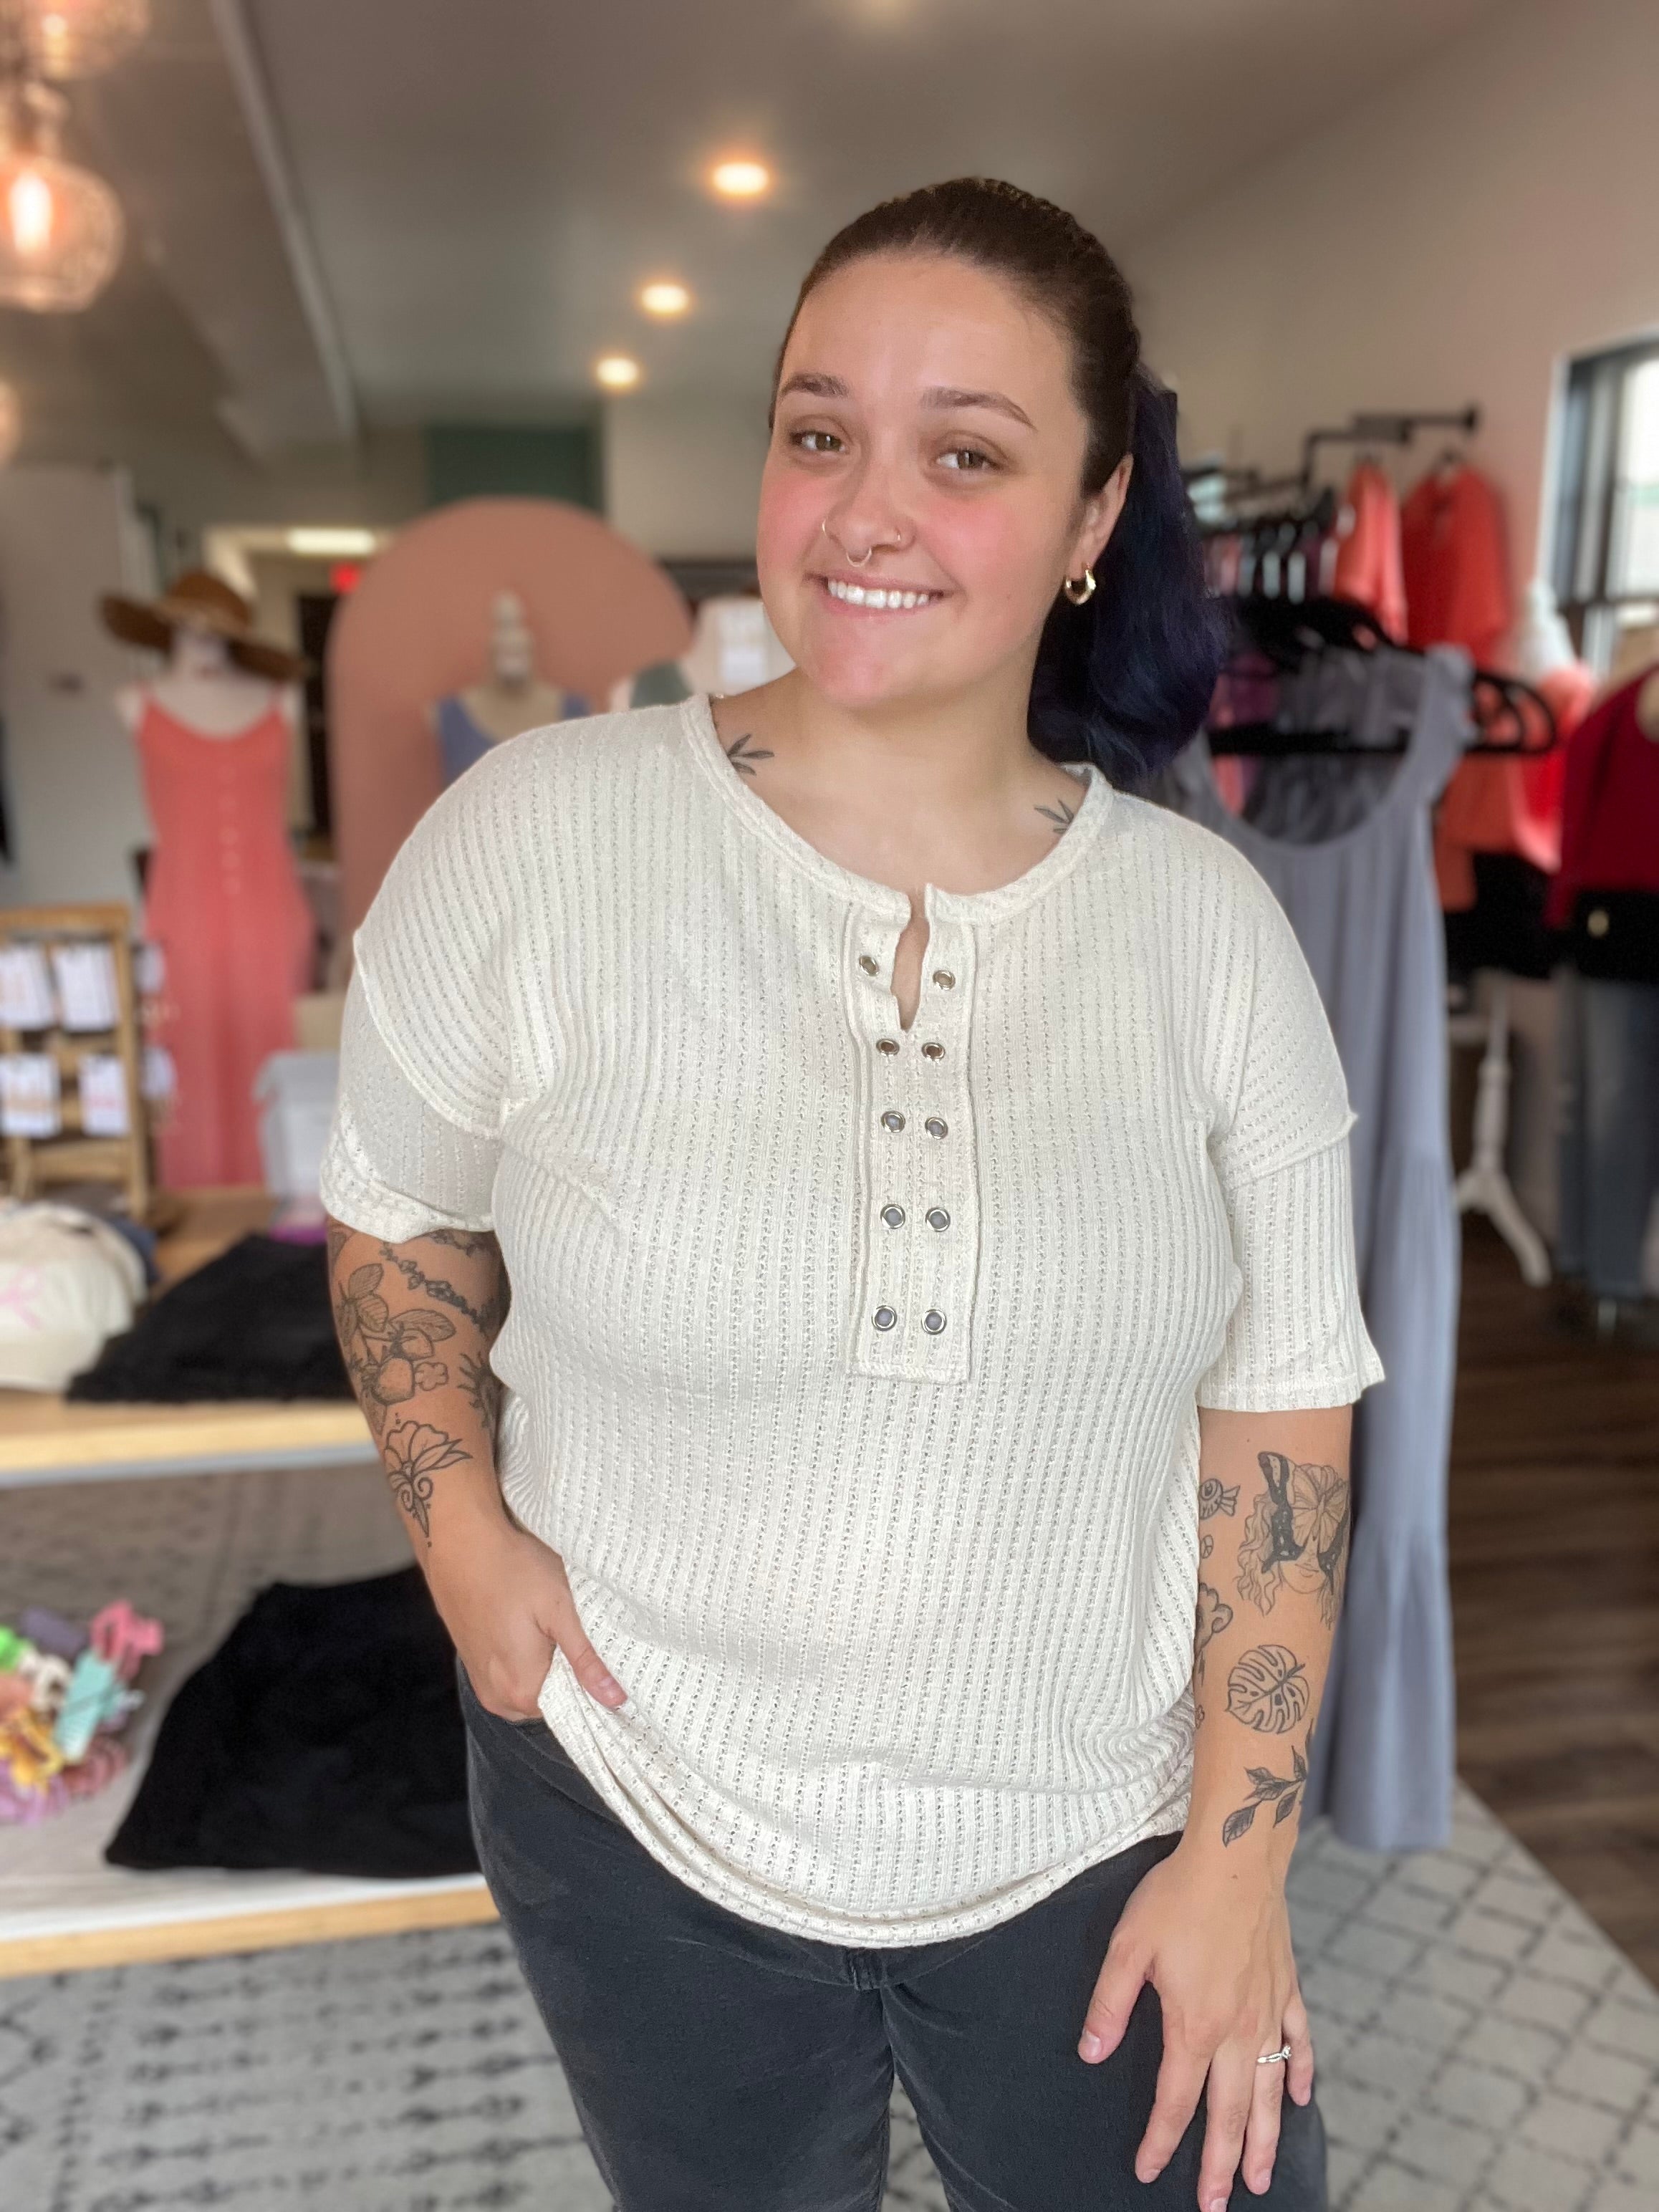 Shop Diana Waffle Top-Shirts & Tops at Ruby Joy Boutique, a Women's Clothing Store in Pickerington, Ohio